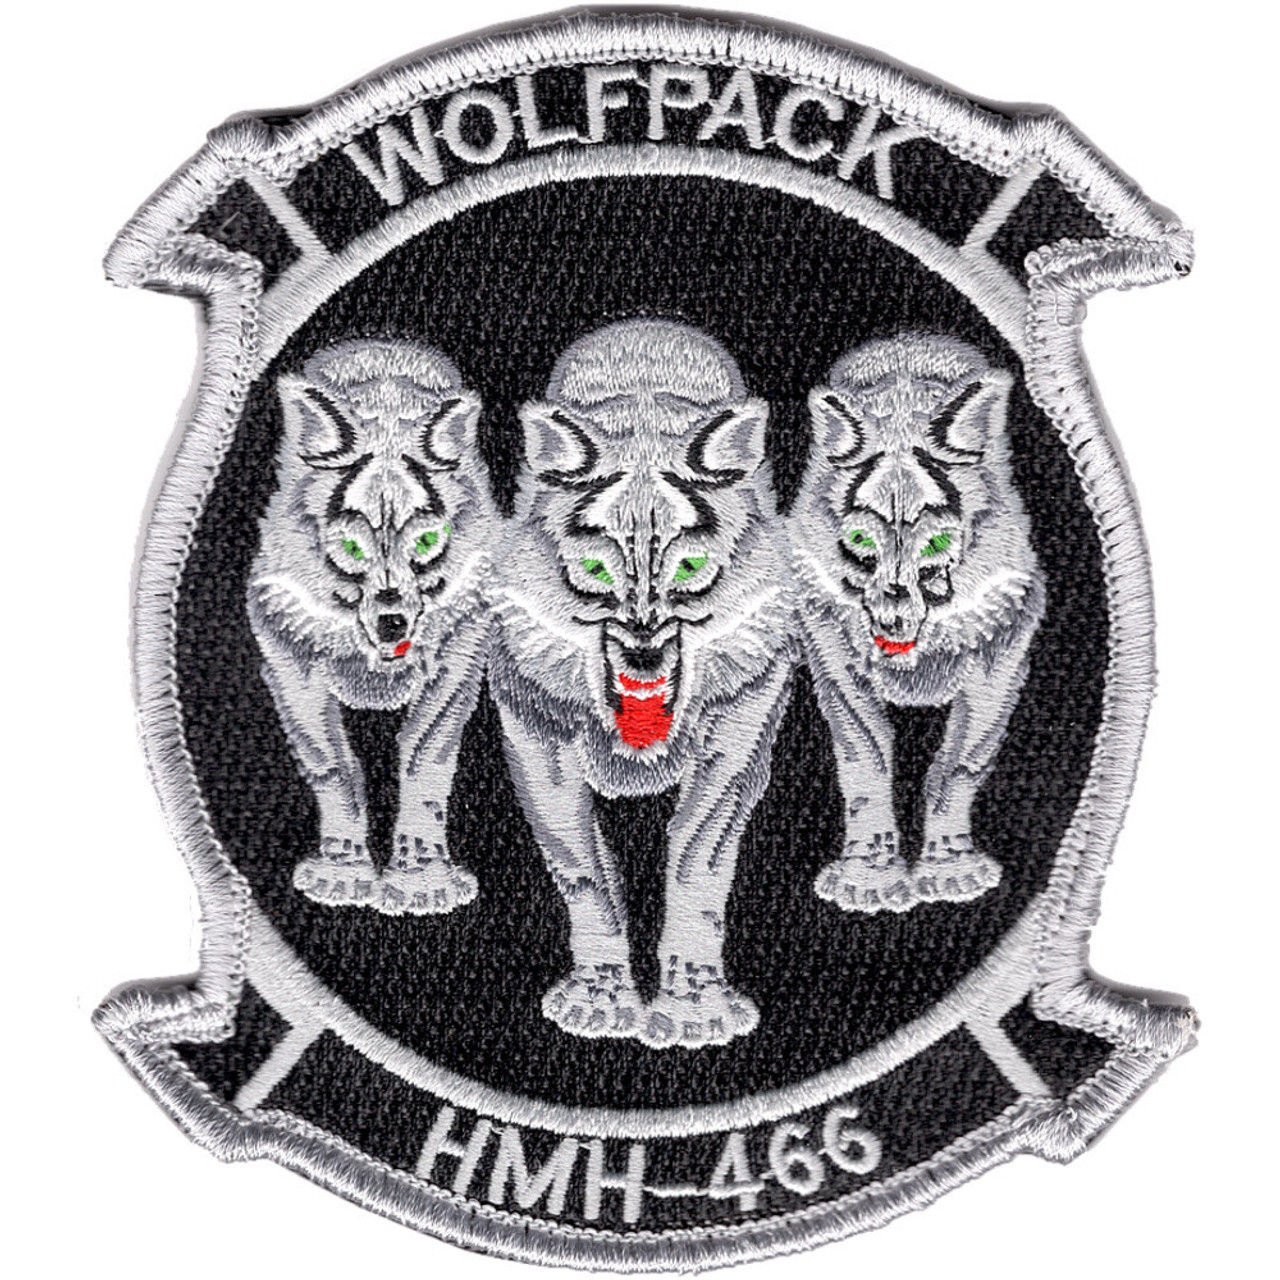 Hmh-466 Wolfpack 3 Wolves Patch \u2013 Sew On